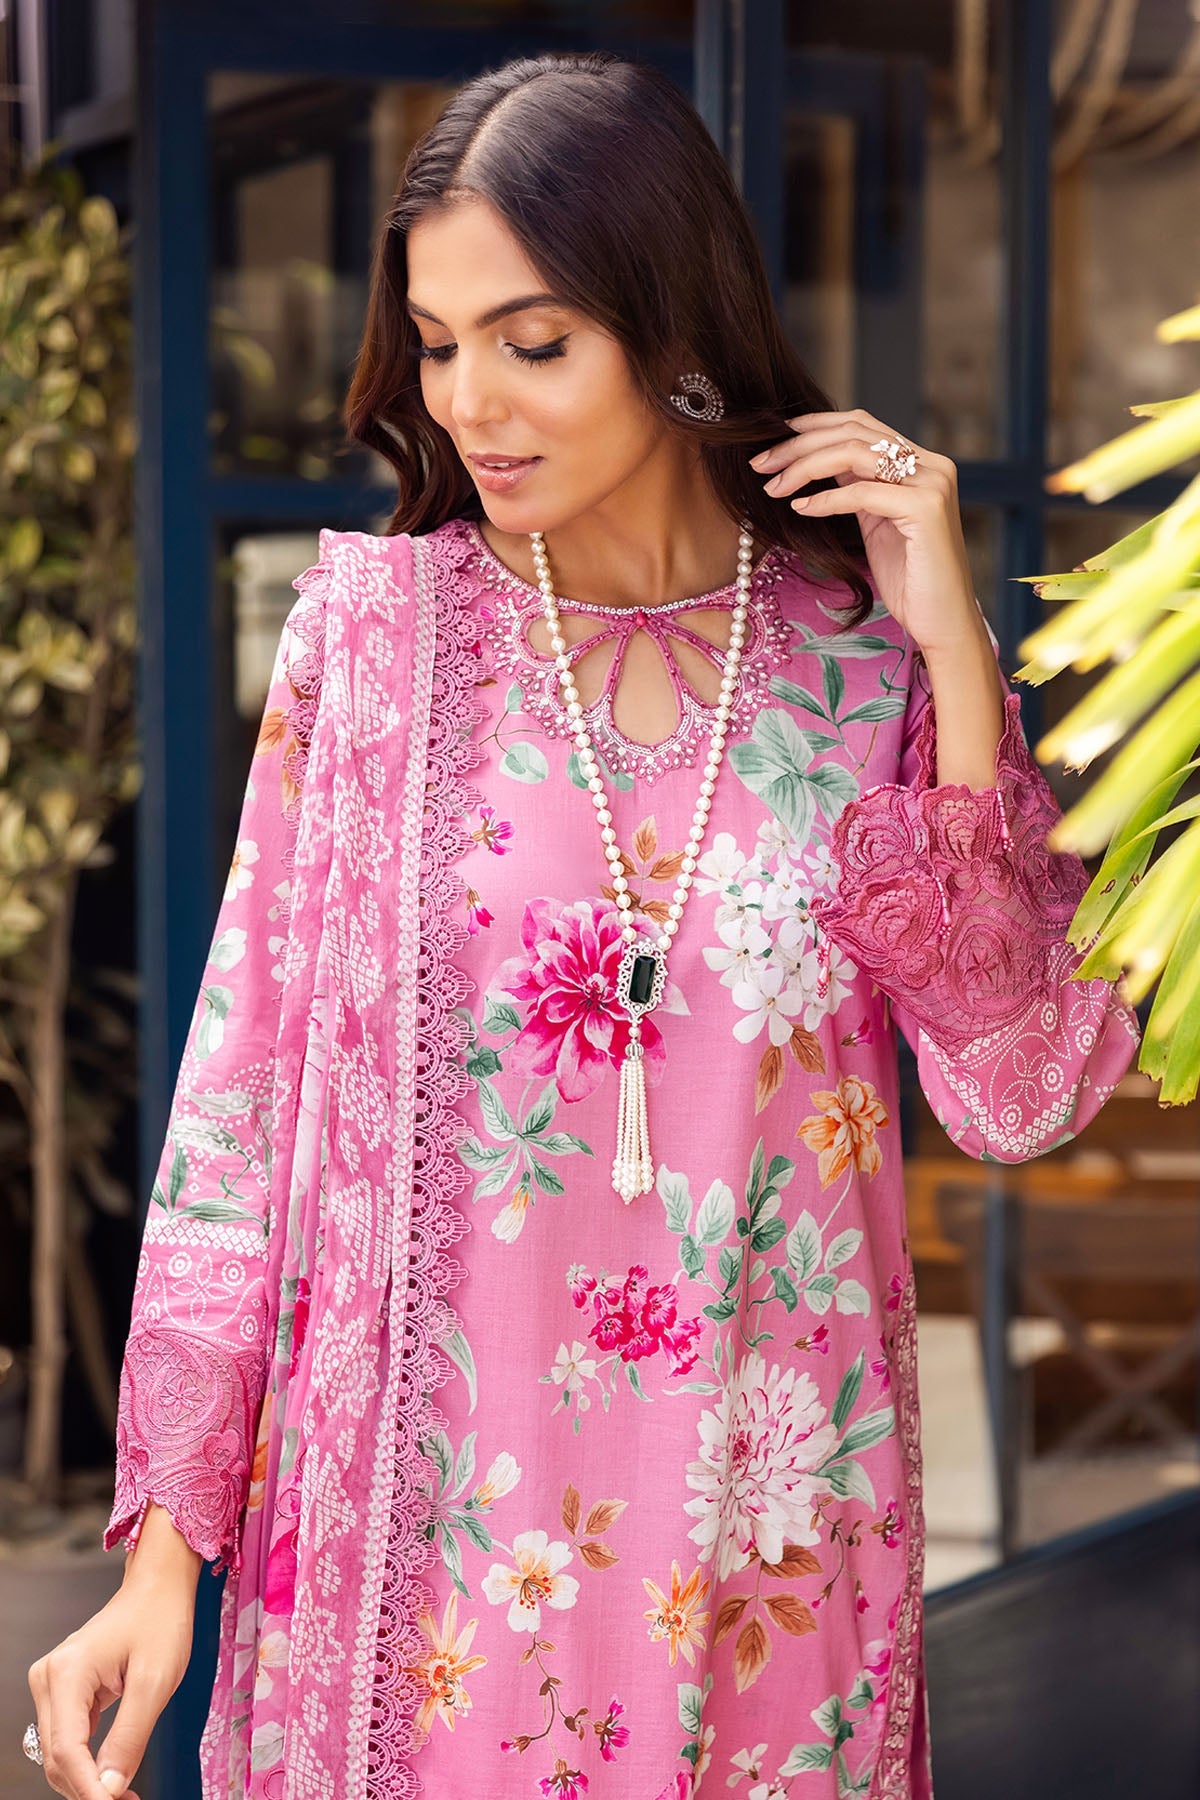 Shop Now, GL-01 - Glam Girl - Lawn Collection 2023 - Nureh - Shahana Collection UK - Wedding and Bridal Party Dresses - Eid edit 2023